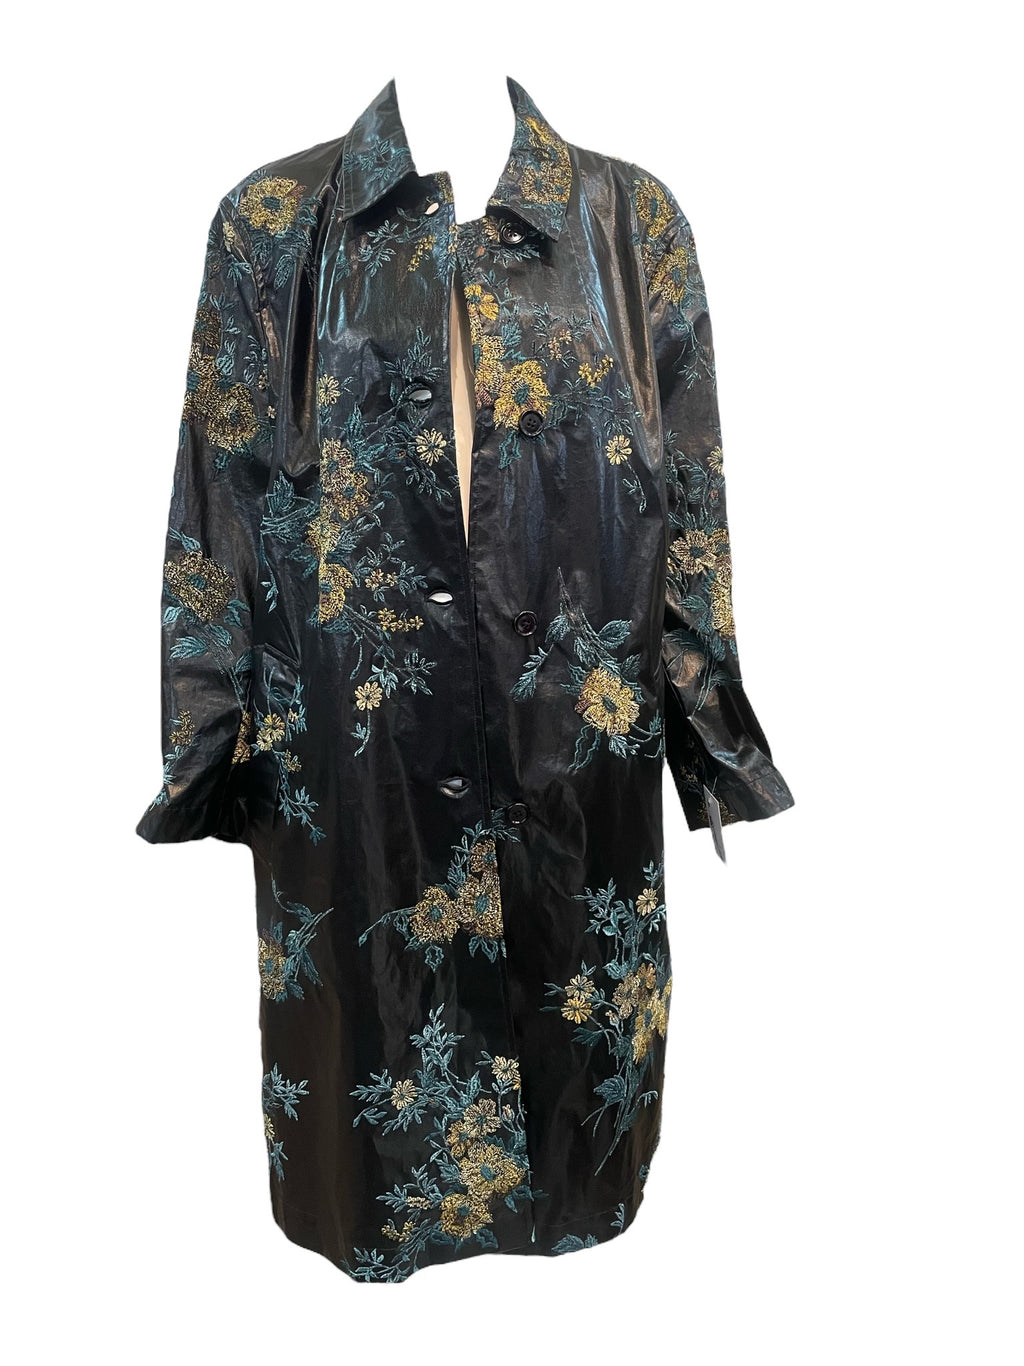 Dries van Noten Contemporary Floral Embroidered Rain Coat FRONT 1 of 5